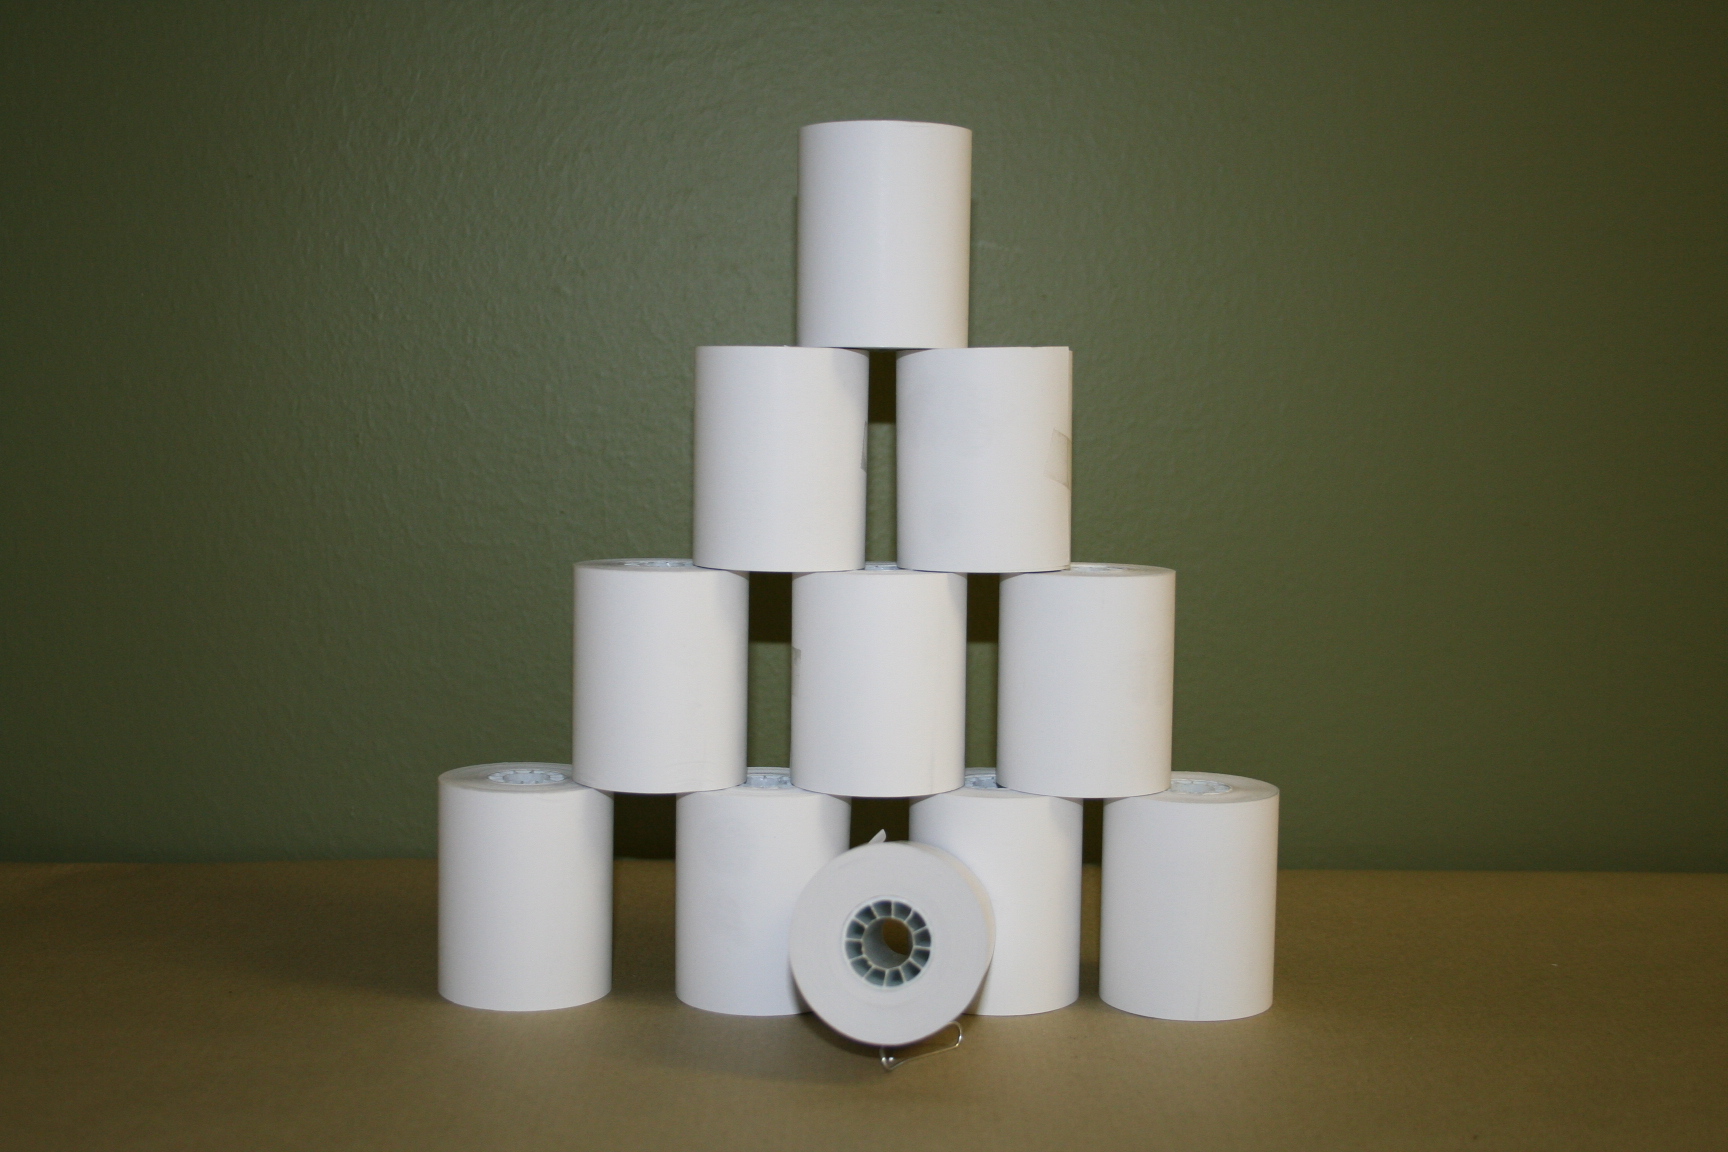 Thermal Credit Card Paper Rolls